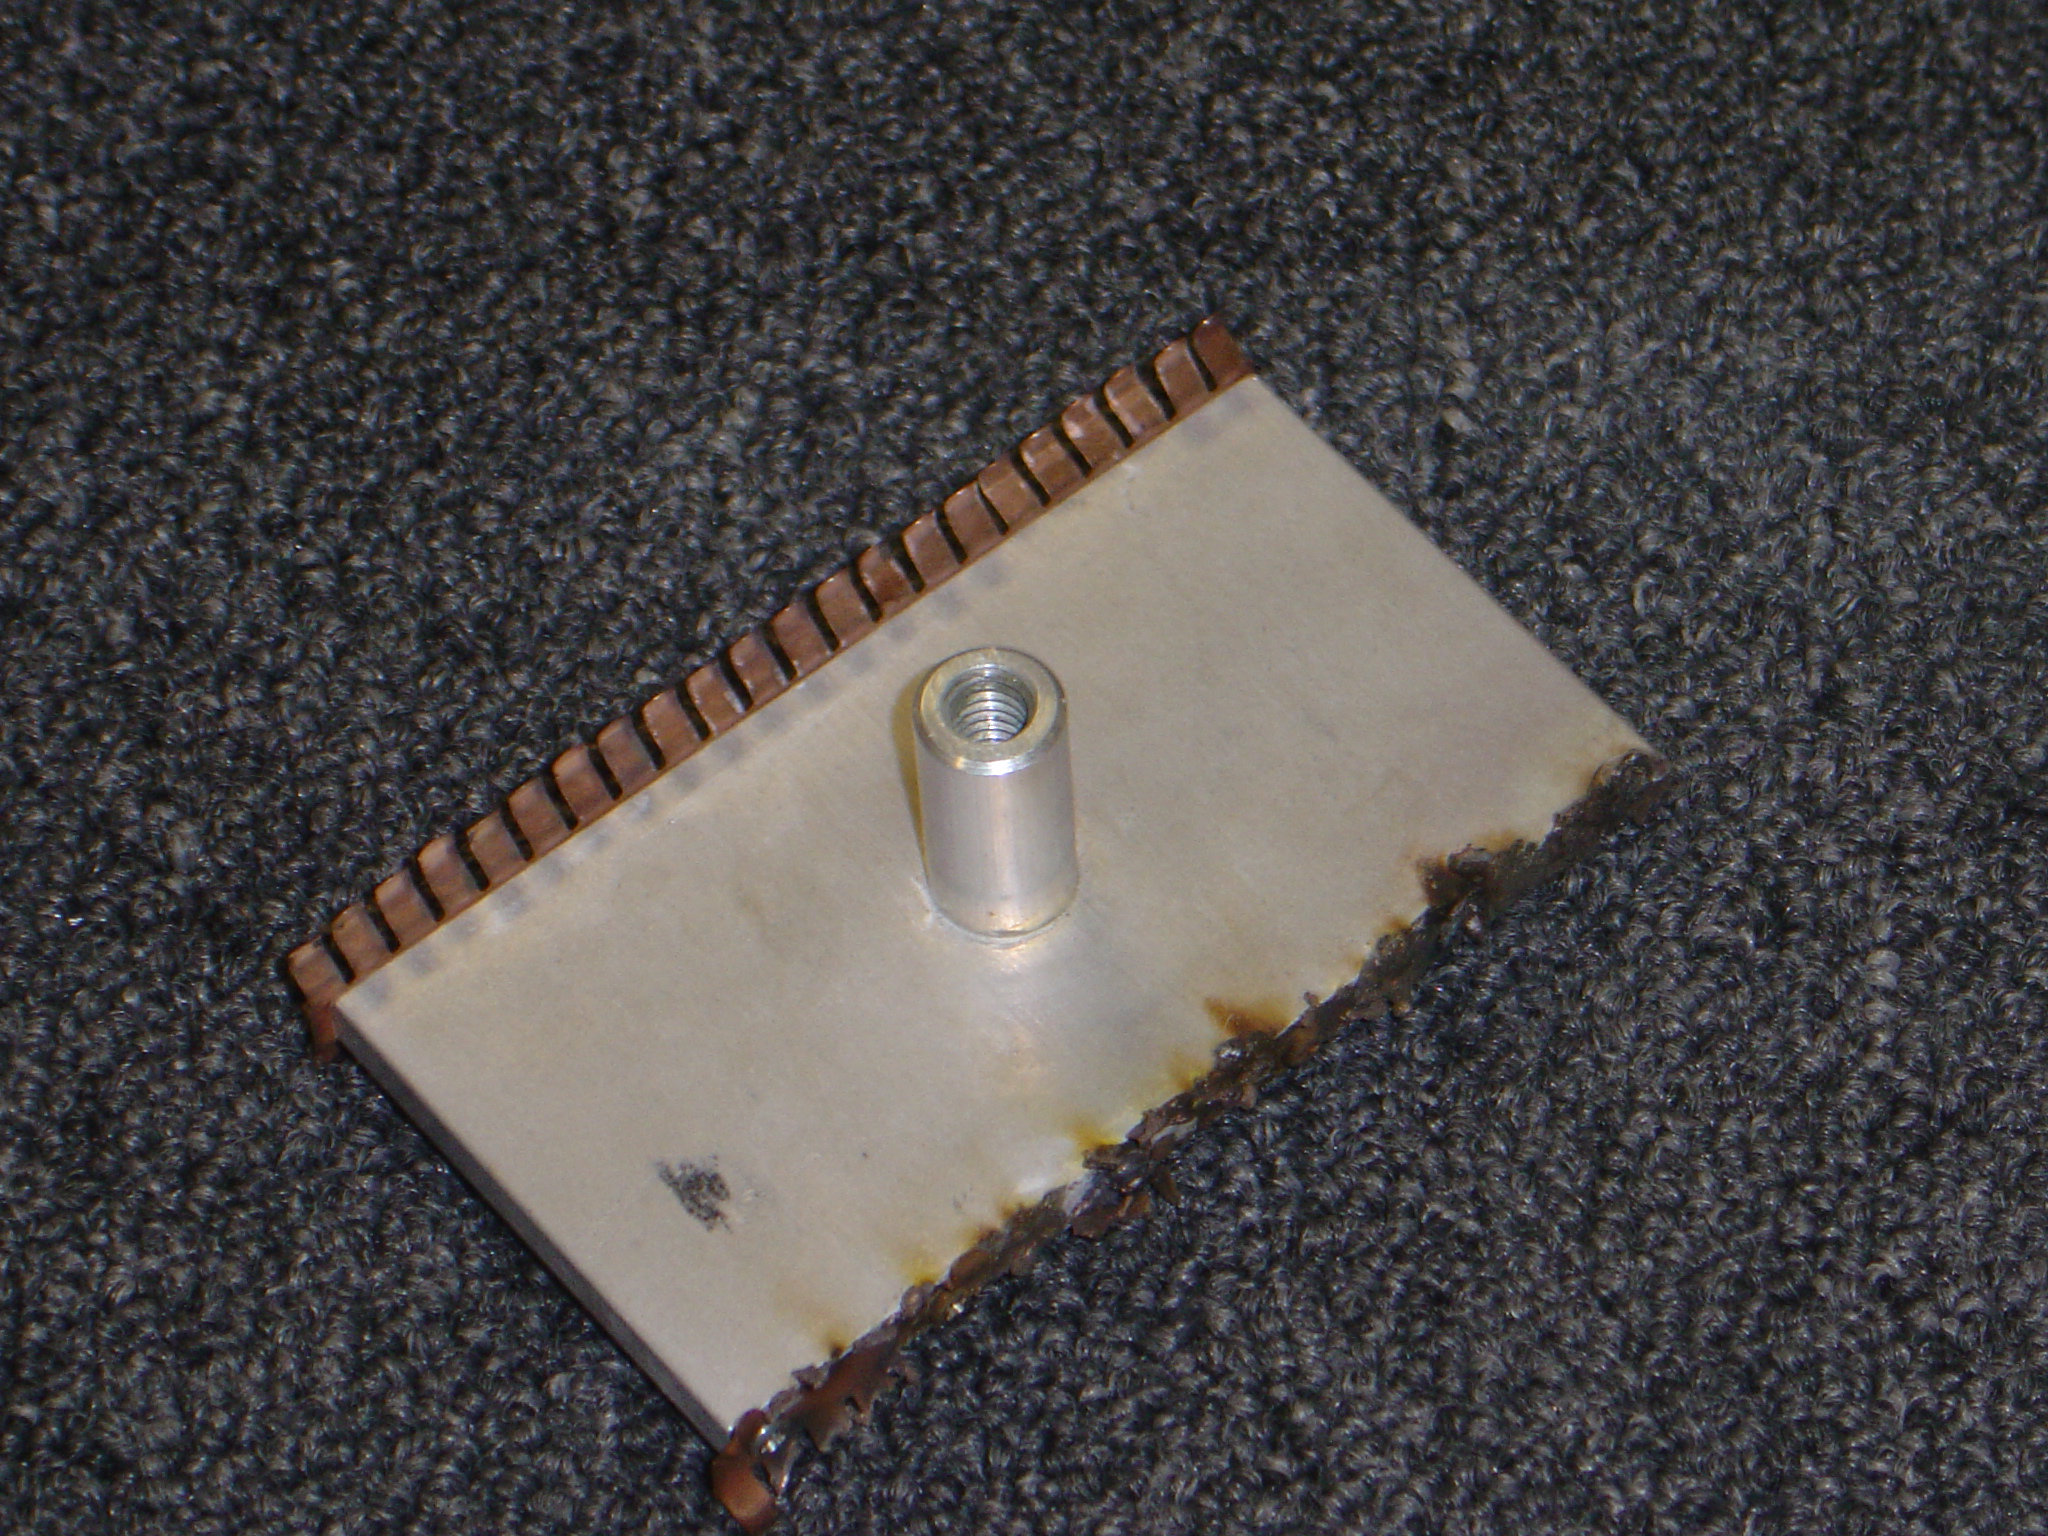 2005 - The burnt out tuning block for the FM Transmitter